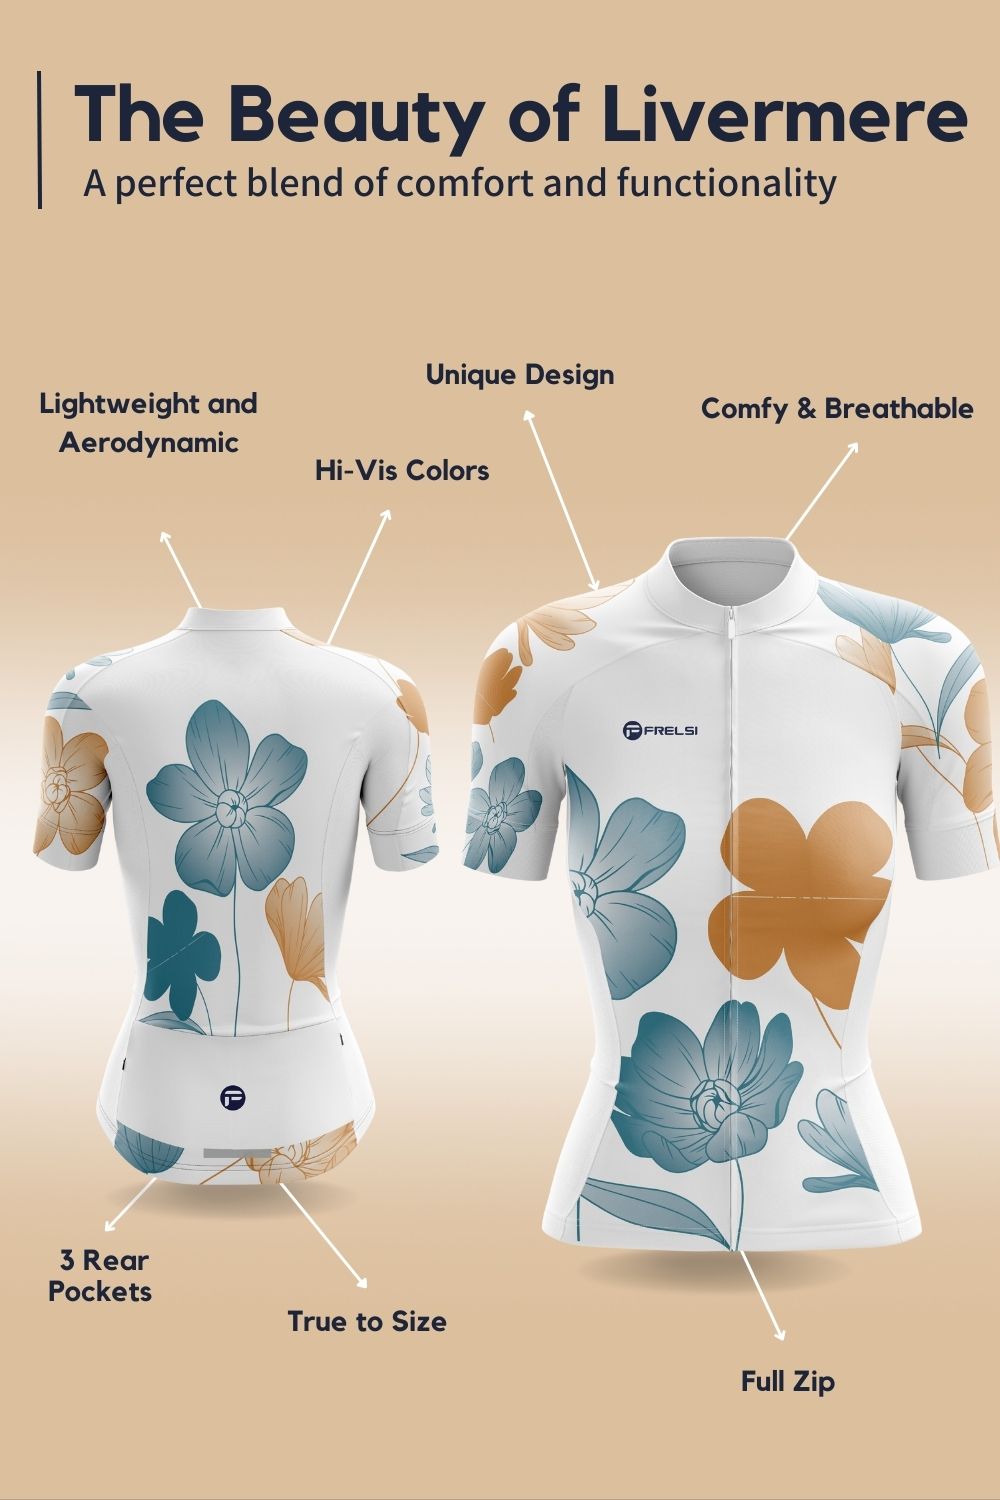 The Beauty of Livermere Men's Cycling Jersey Facts & Features